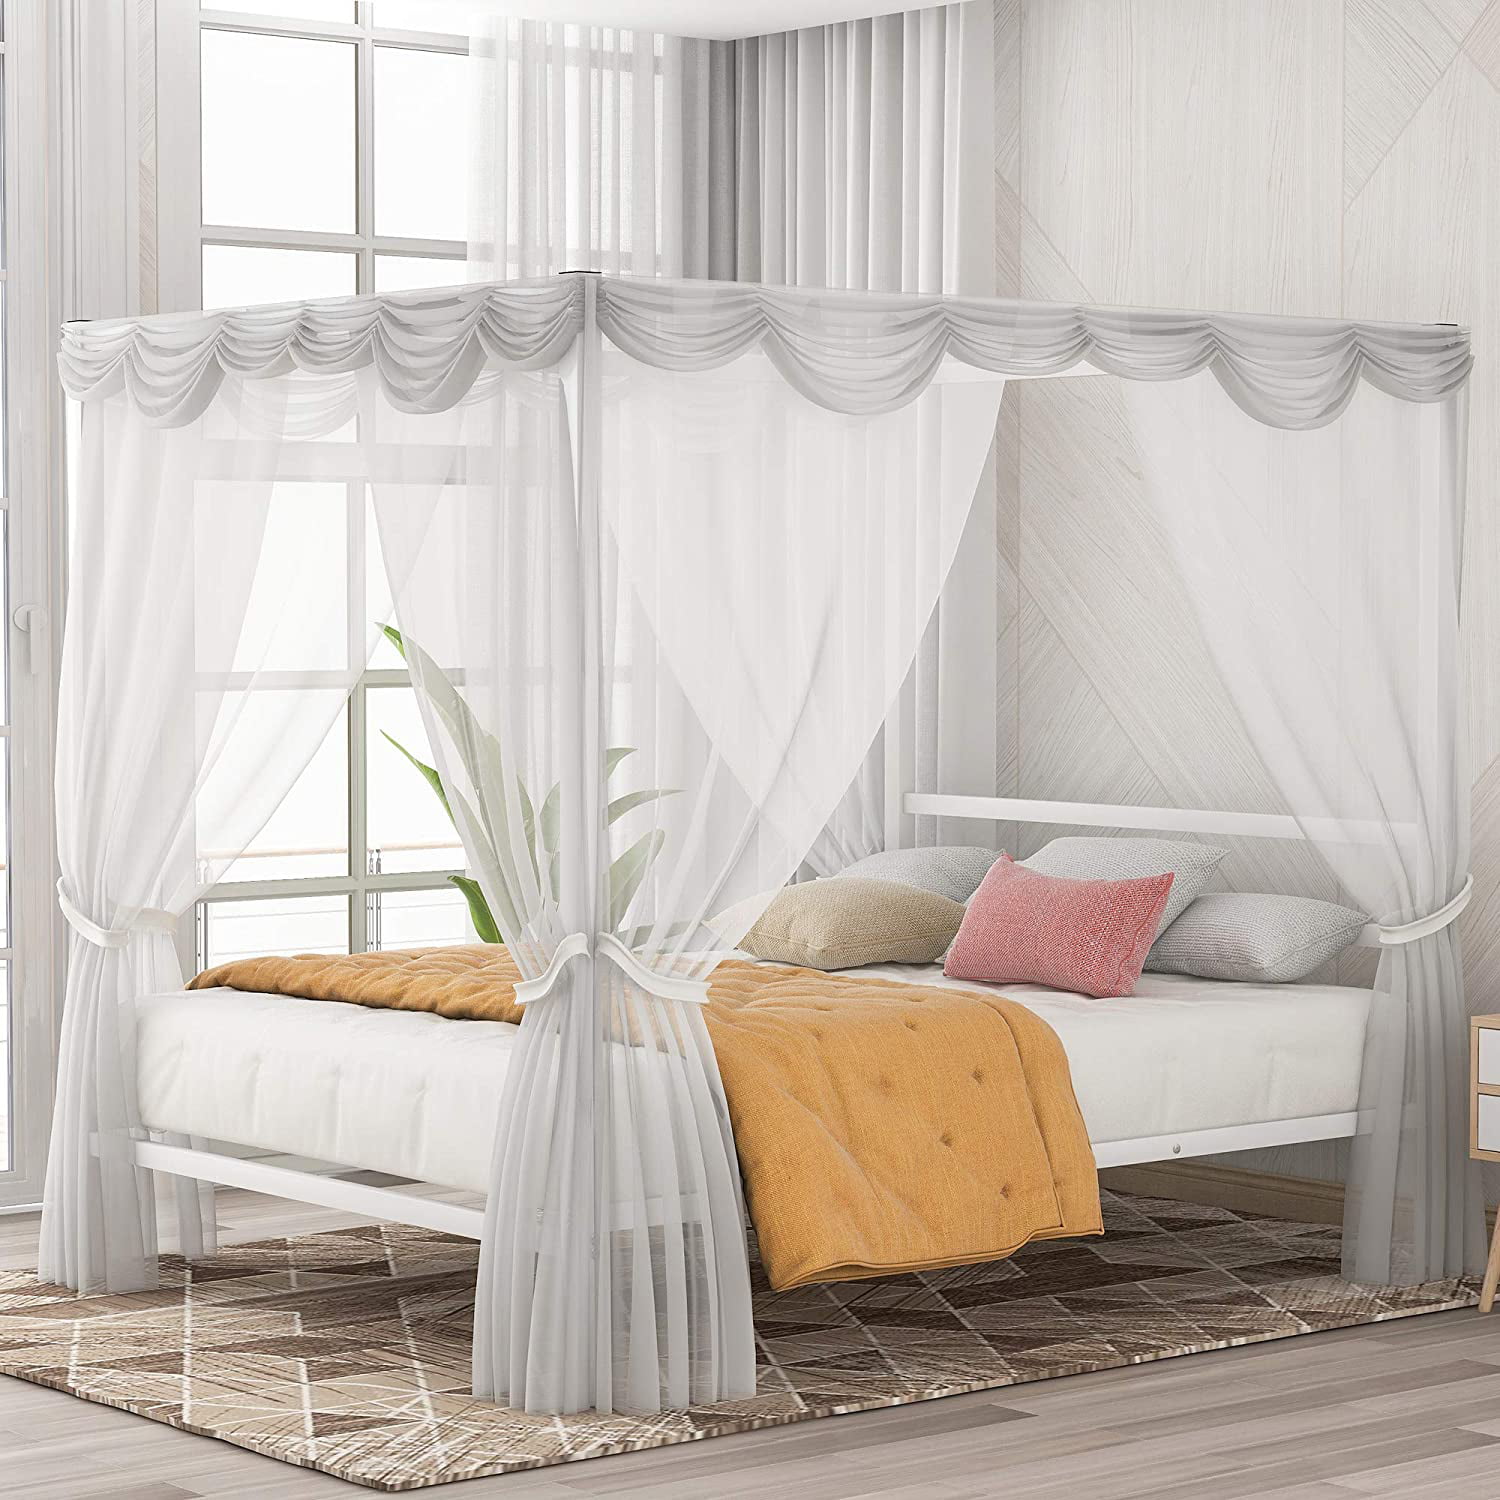 Details about   summer bed canopy double layers lace valances bed curatin mosquito net with tube 